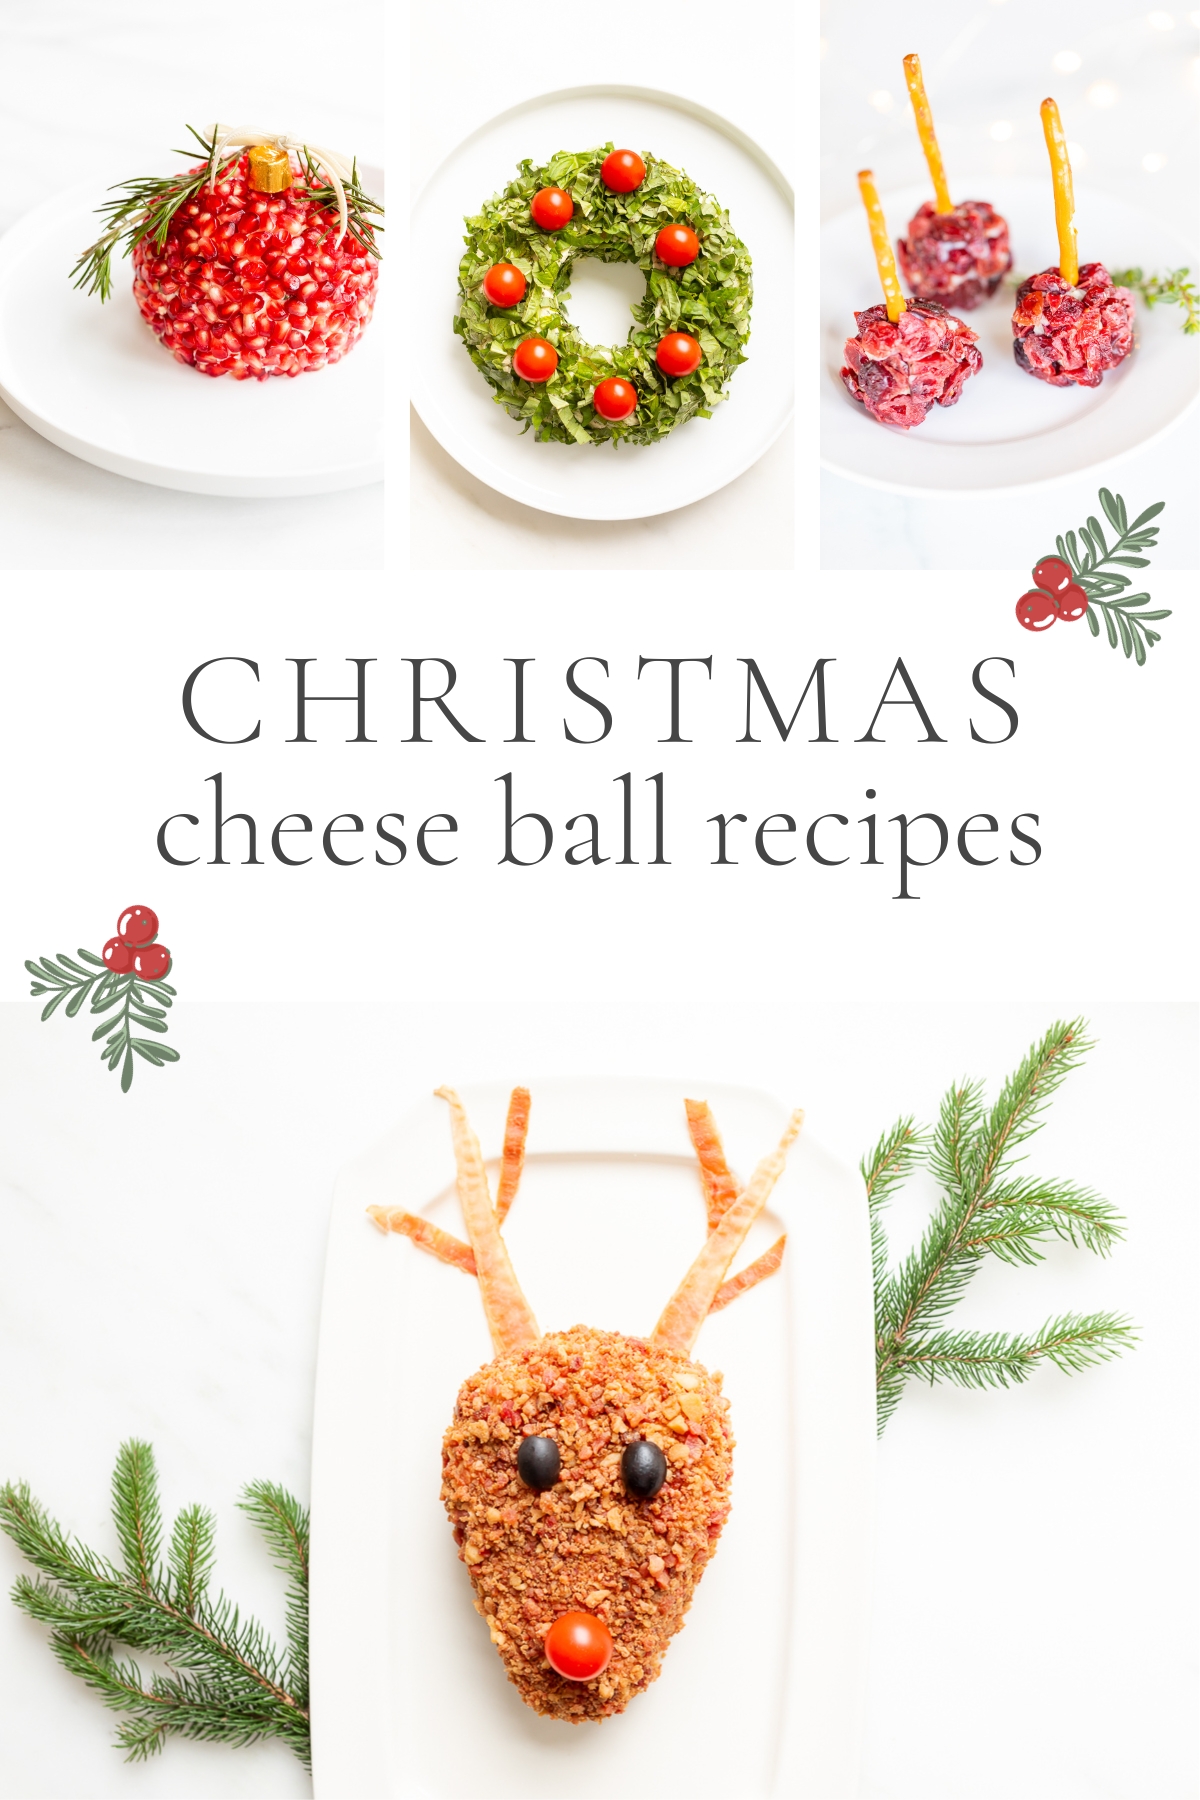 A graphic featuring a variety of holiday cheeseballs, titled 